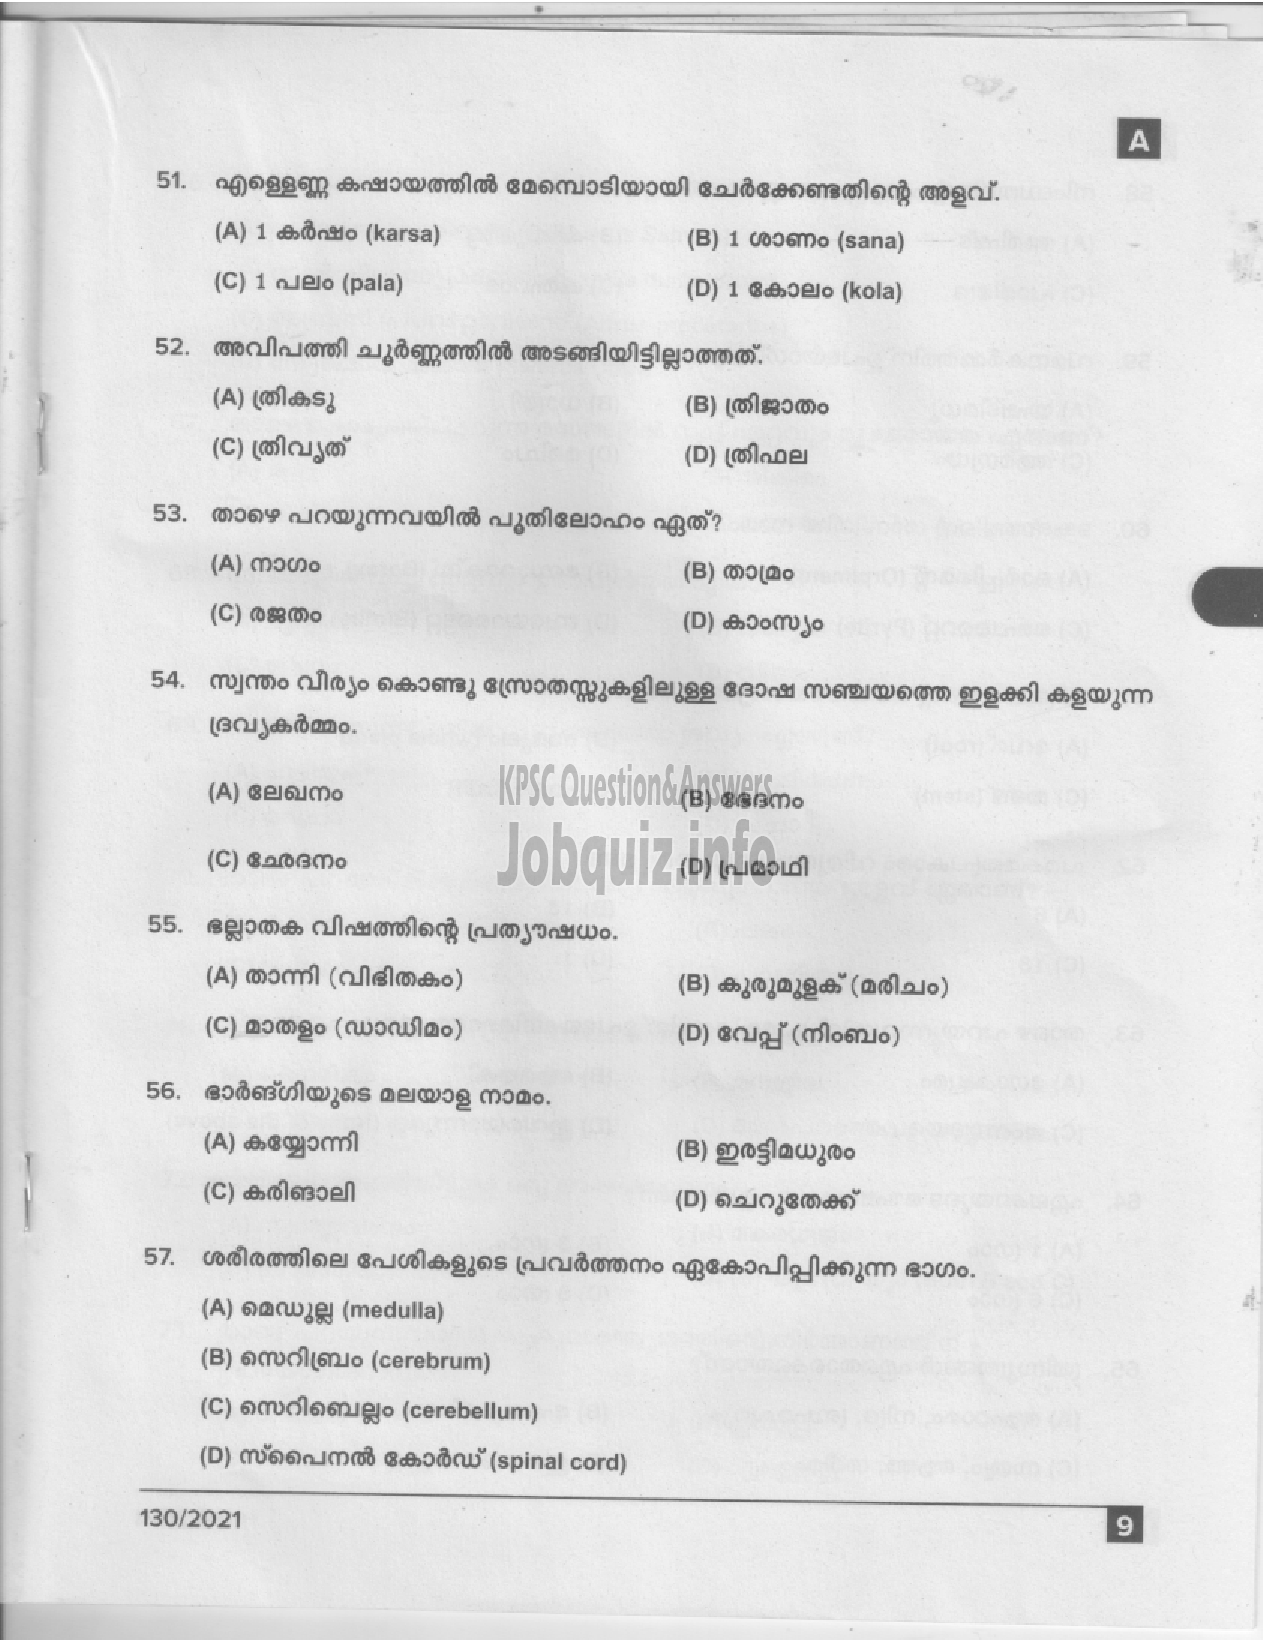 Kerala PSC Question Paper - Pharmacist Gr II (Ayurveda) - ISM/ IMS/ Ayurveda Colleges-7